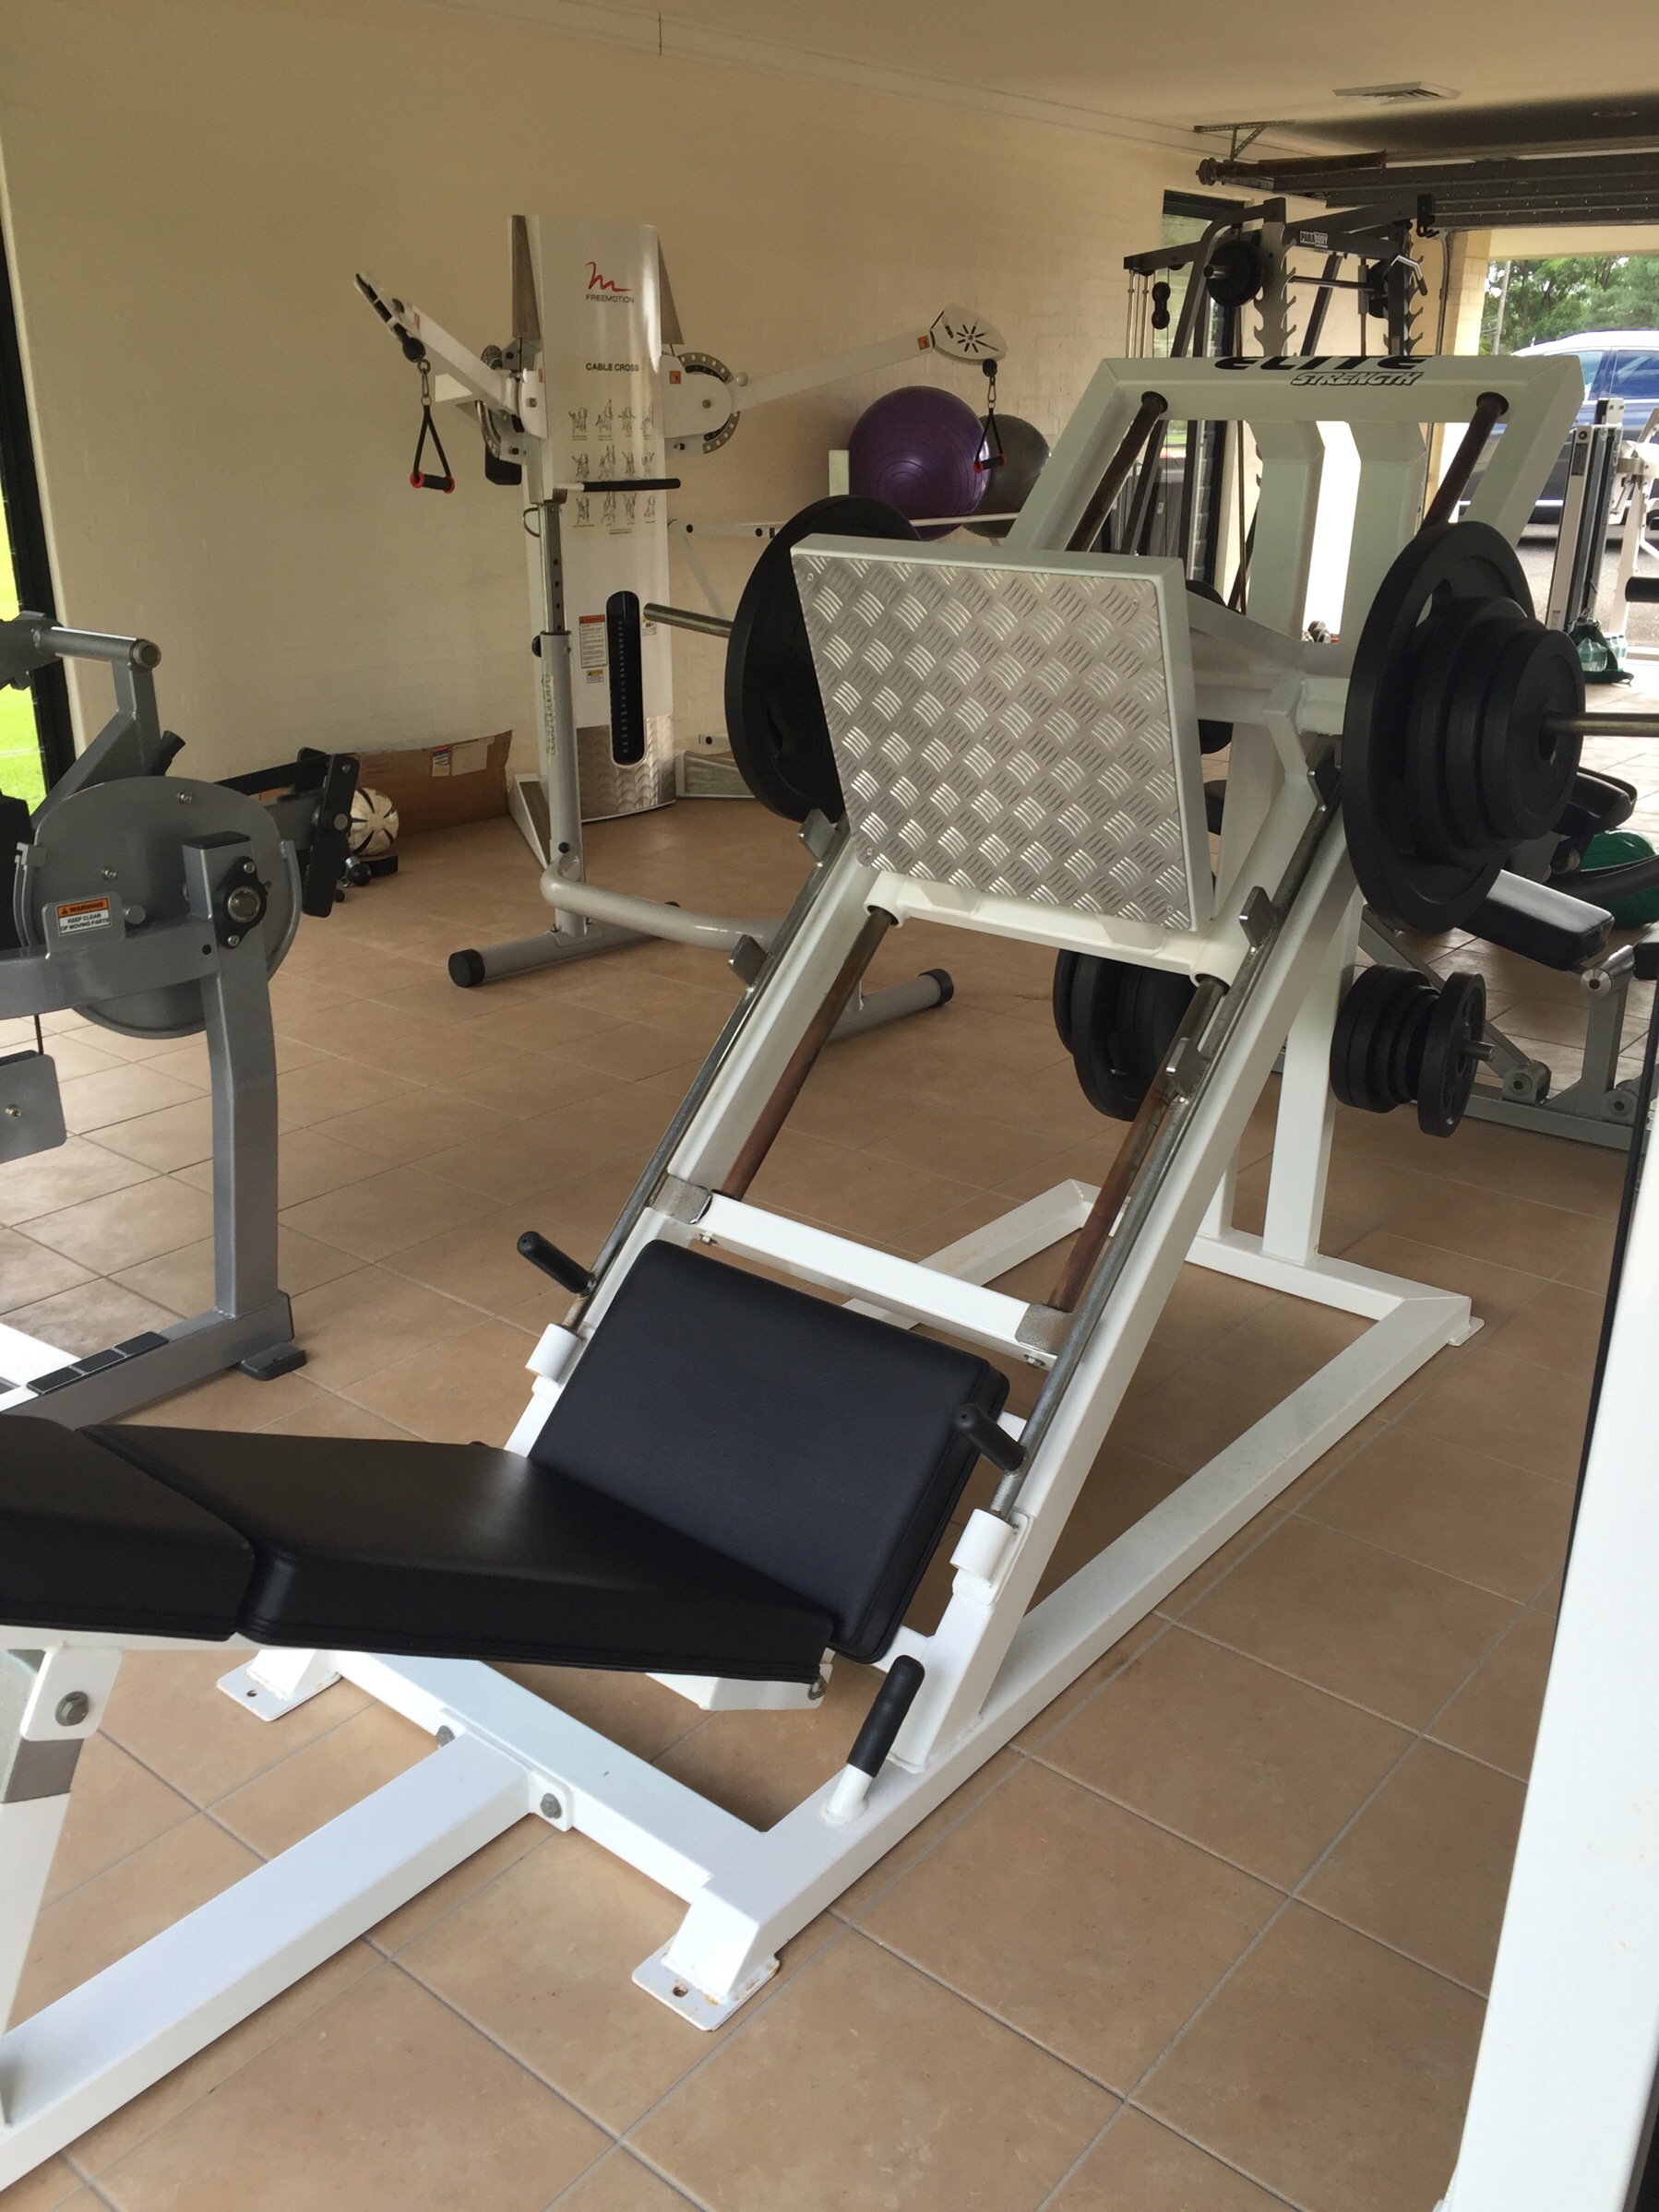  Leg Gym Machines For Sale for Push Pull Legs